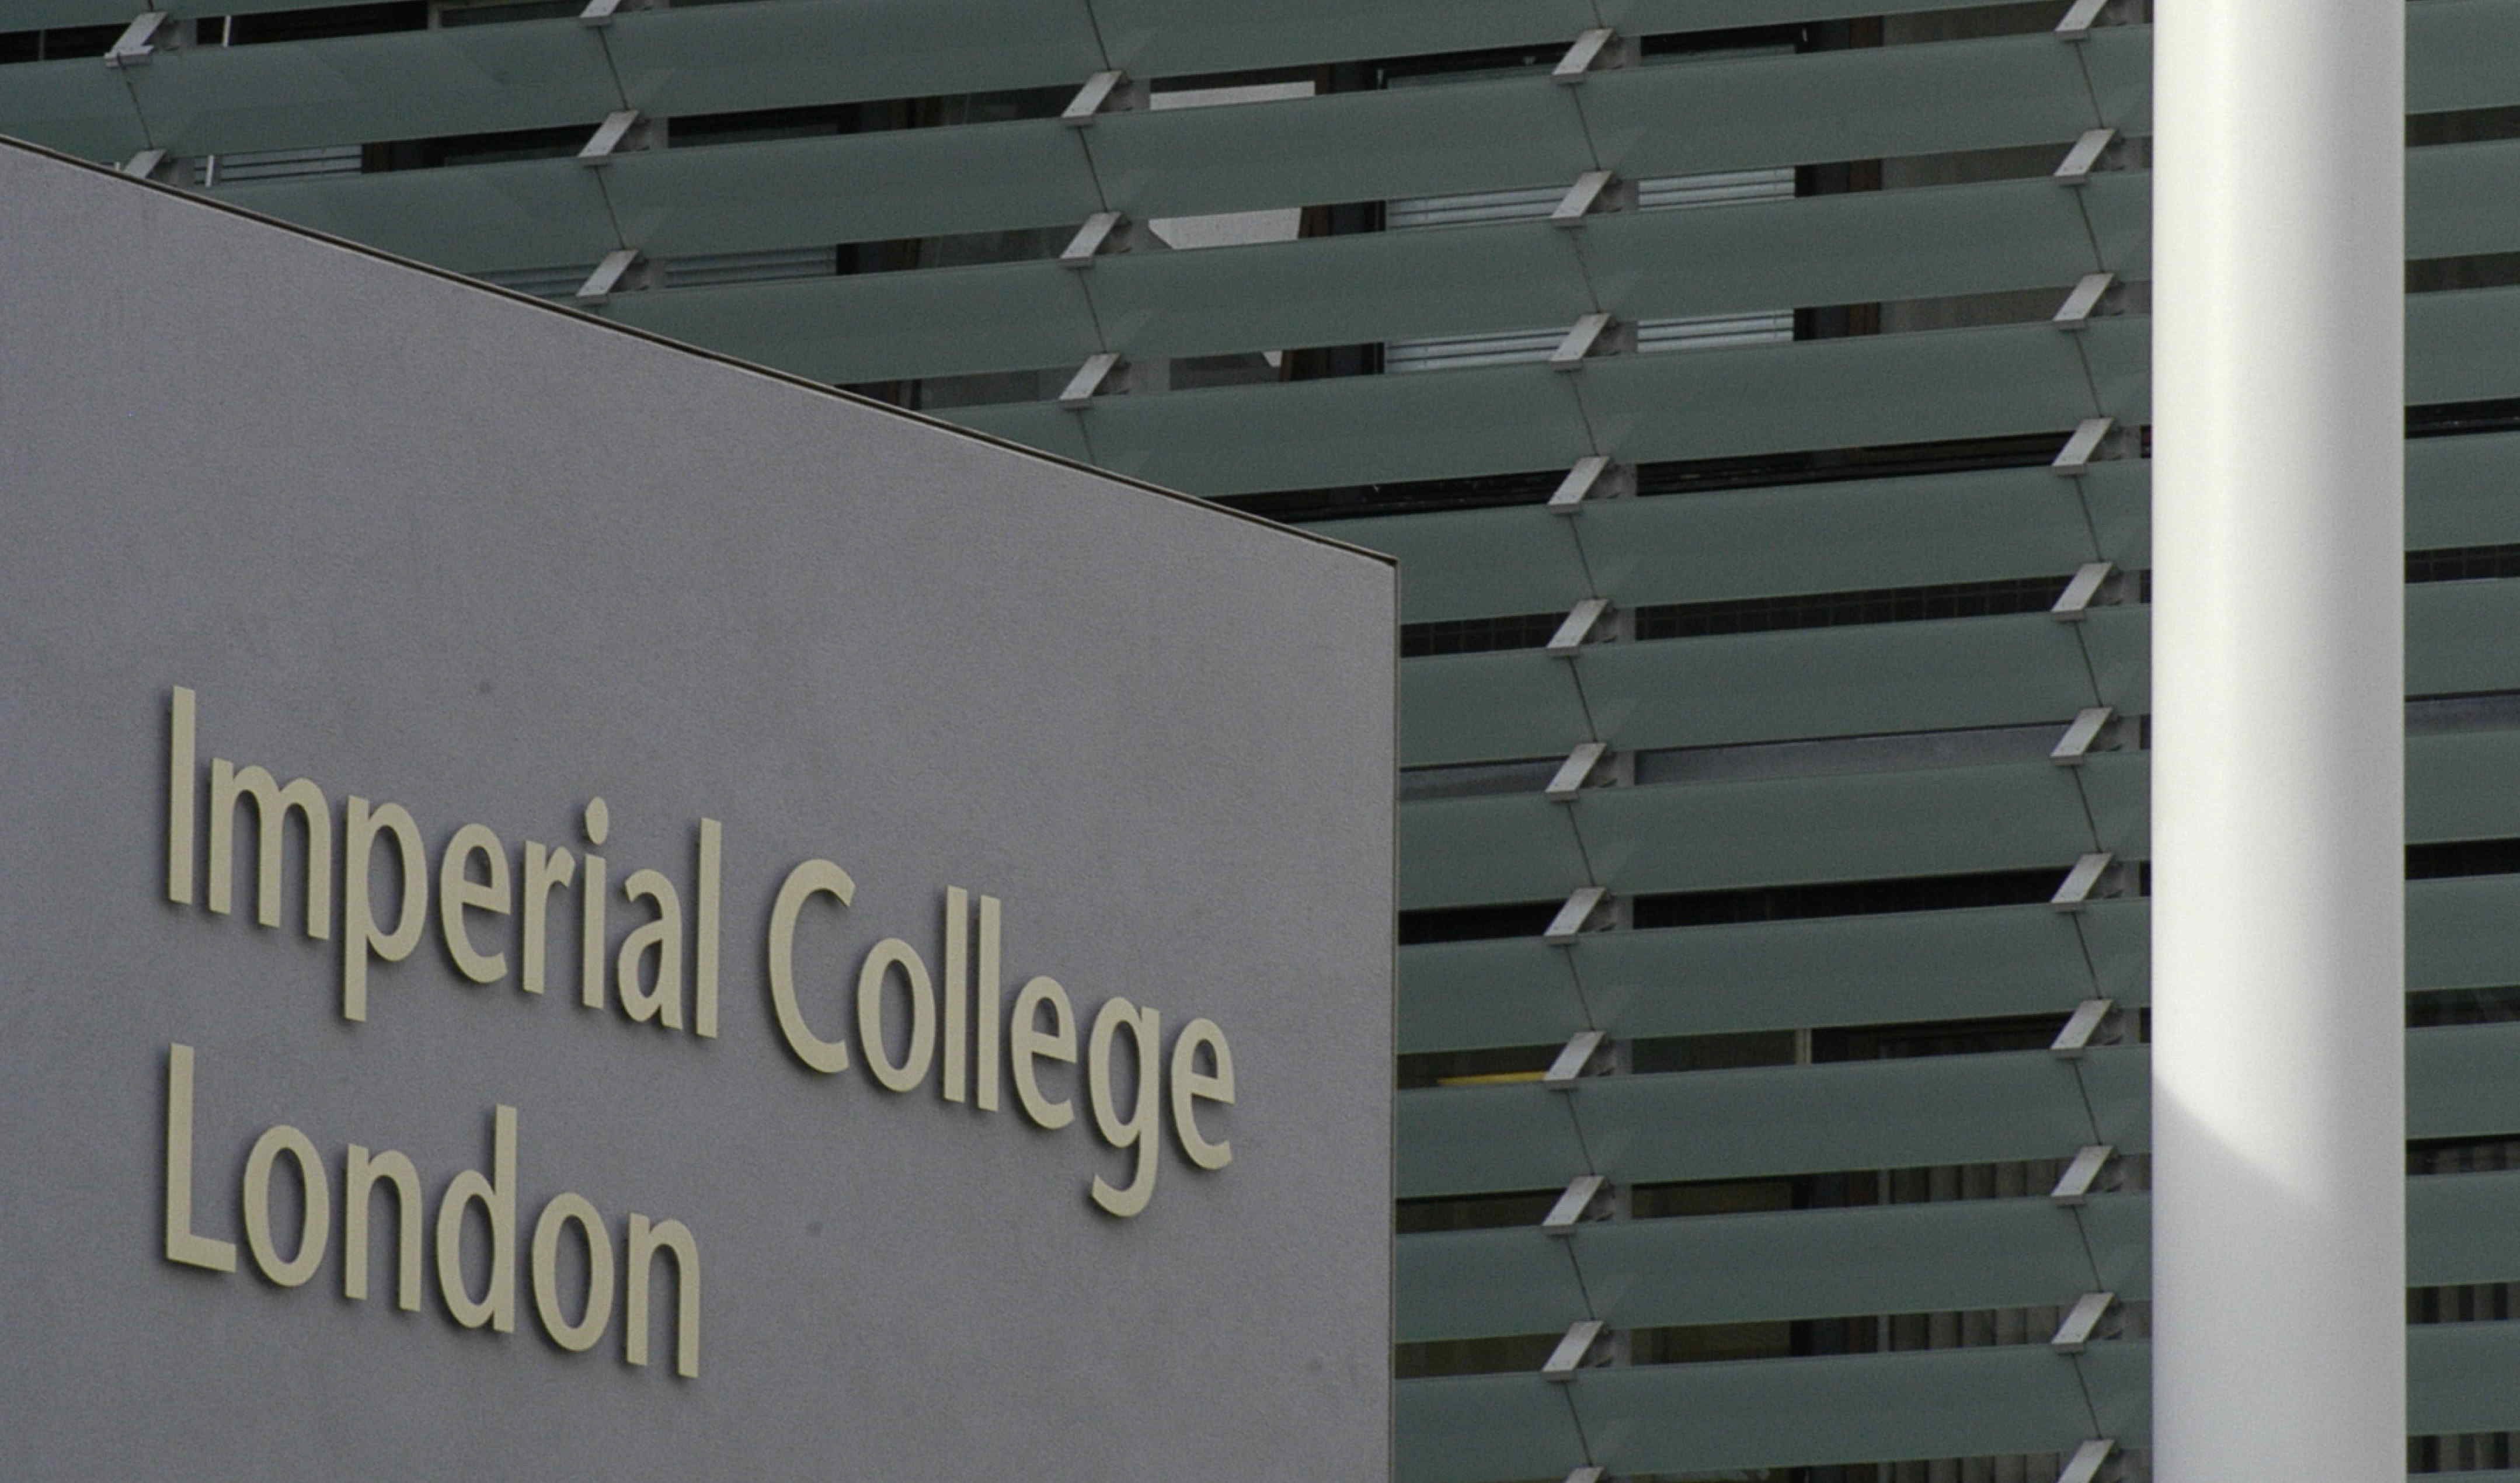 Image of the lettering of Imperial College London 